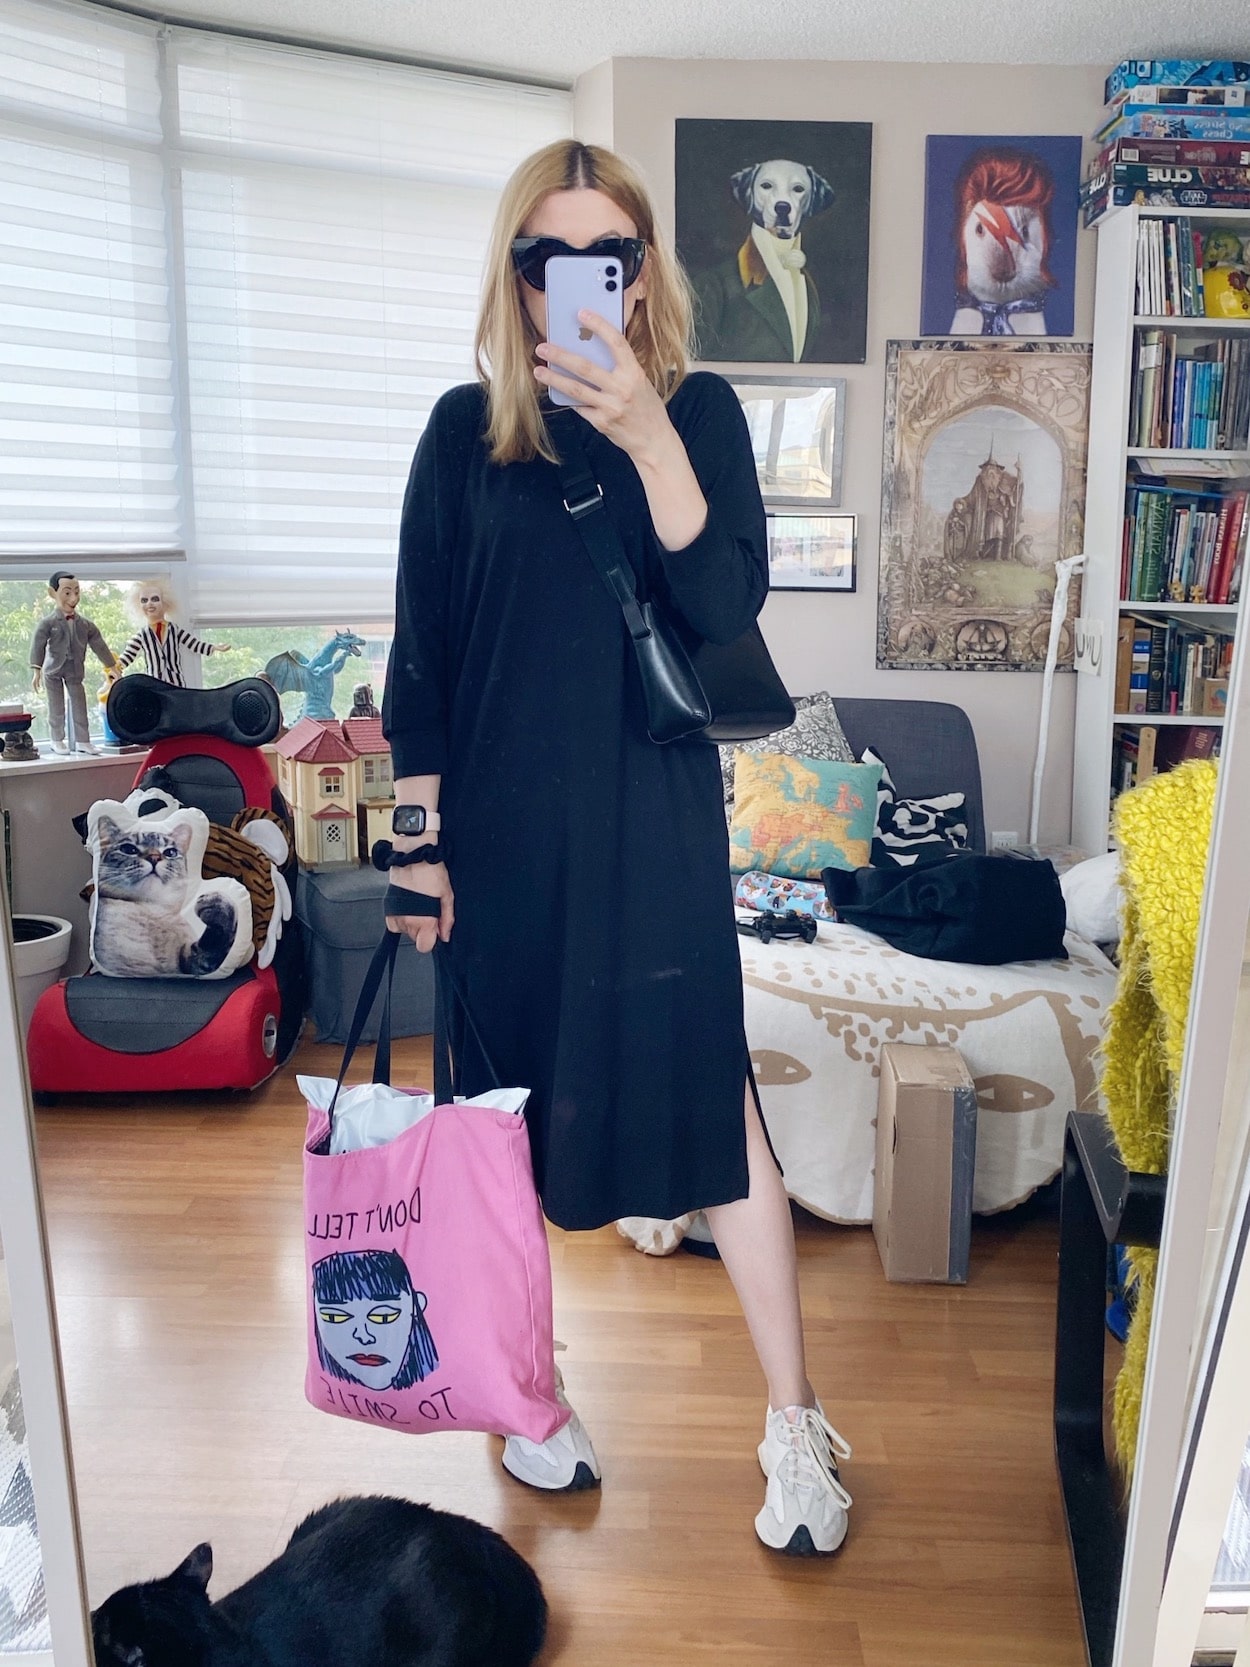 I am wearing a black shirt dress, Everlance crossbody, Le Specs sunglasses, New Balance Sneakers, and a tote.